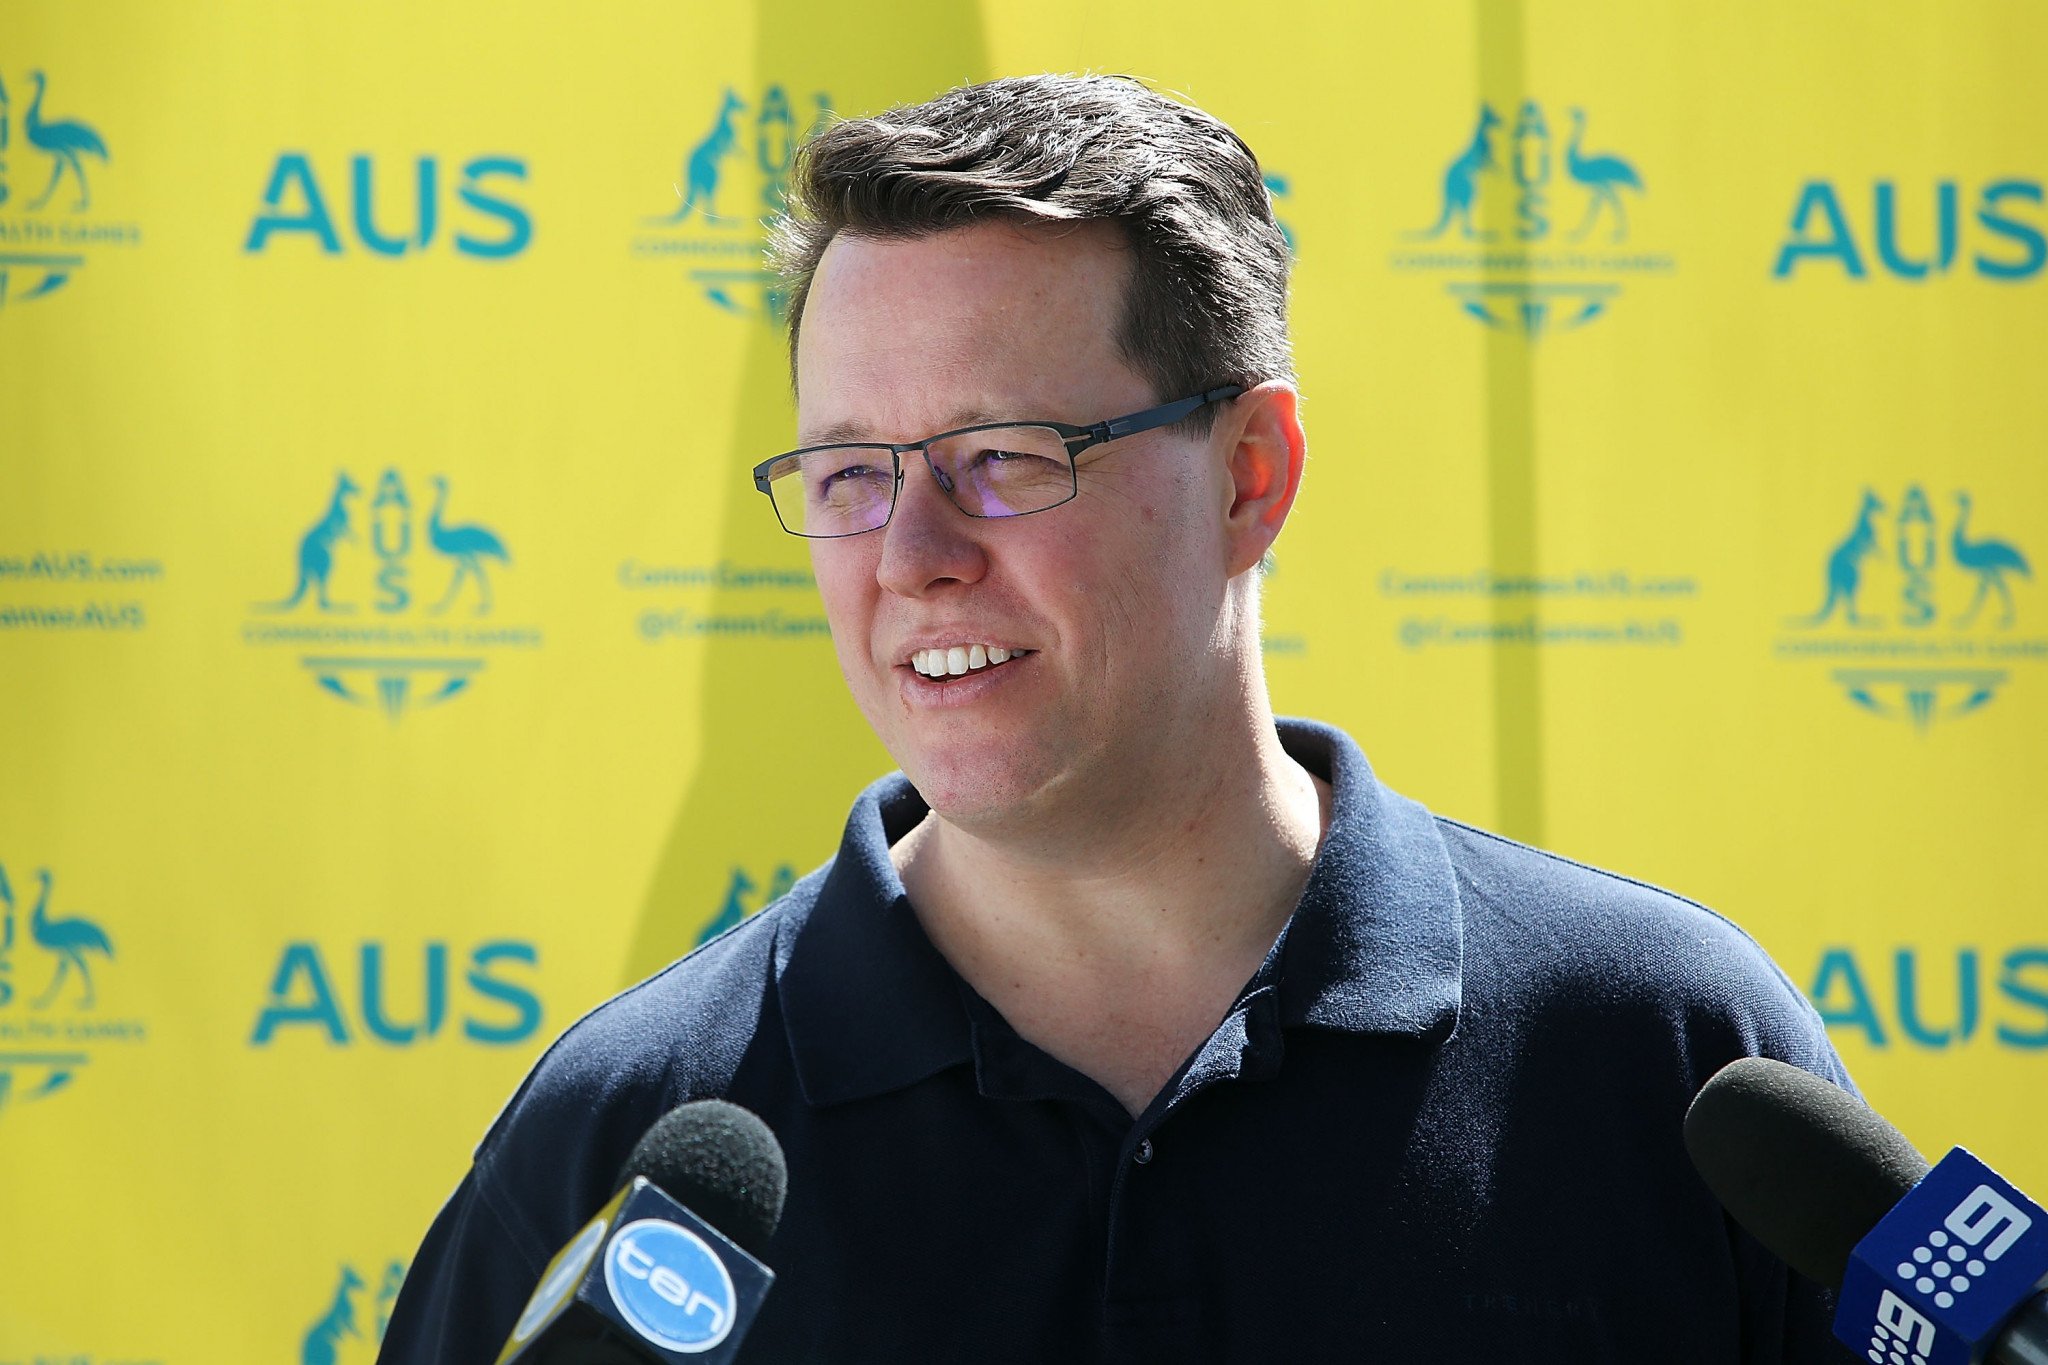 Double Olympic champion Perkins becomes Swimming Australia President